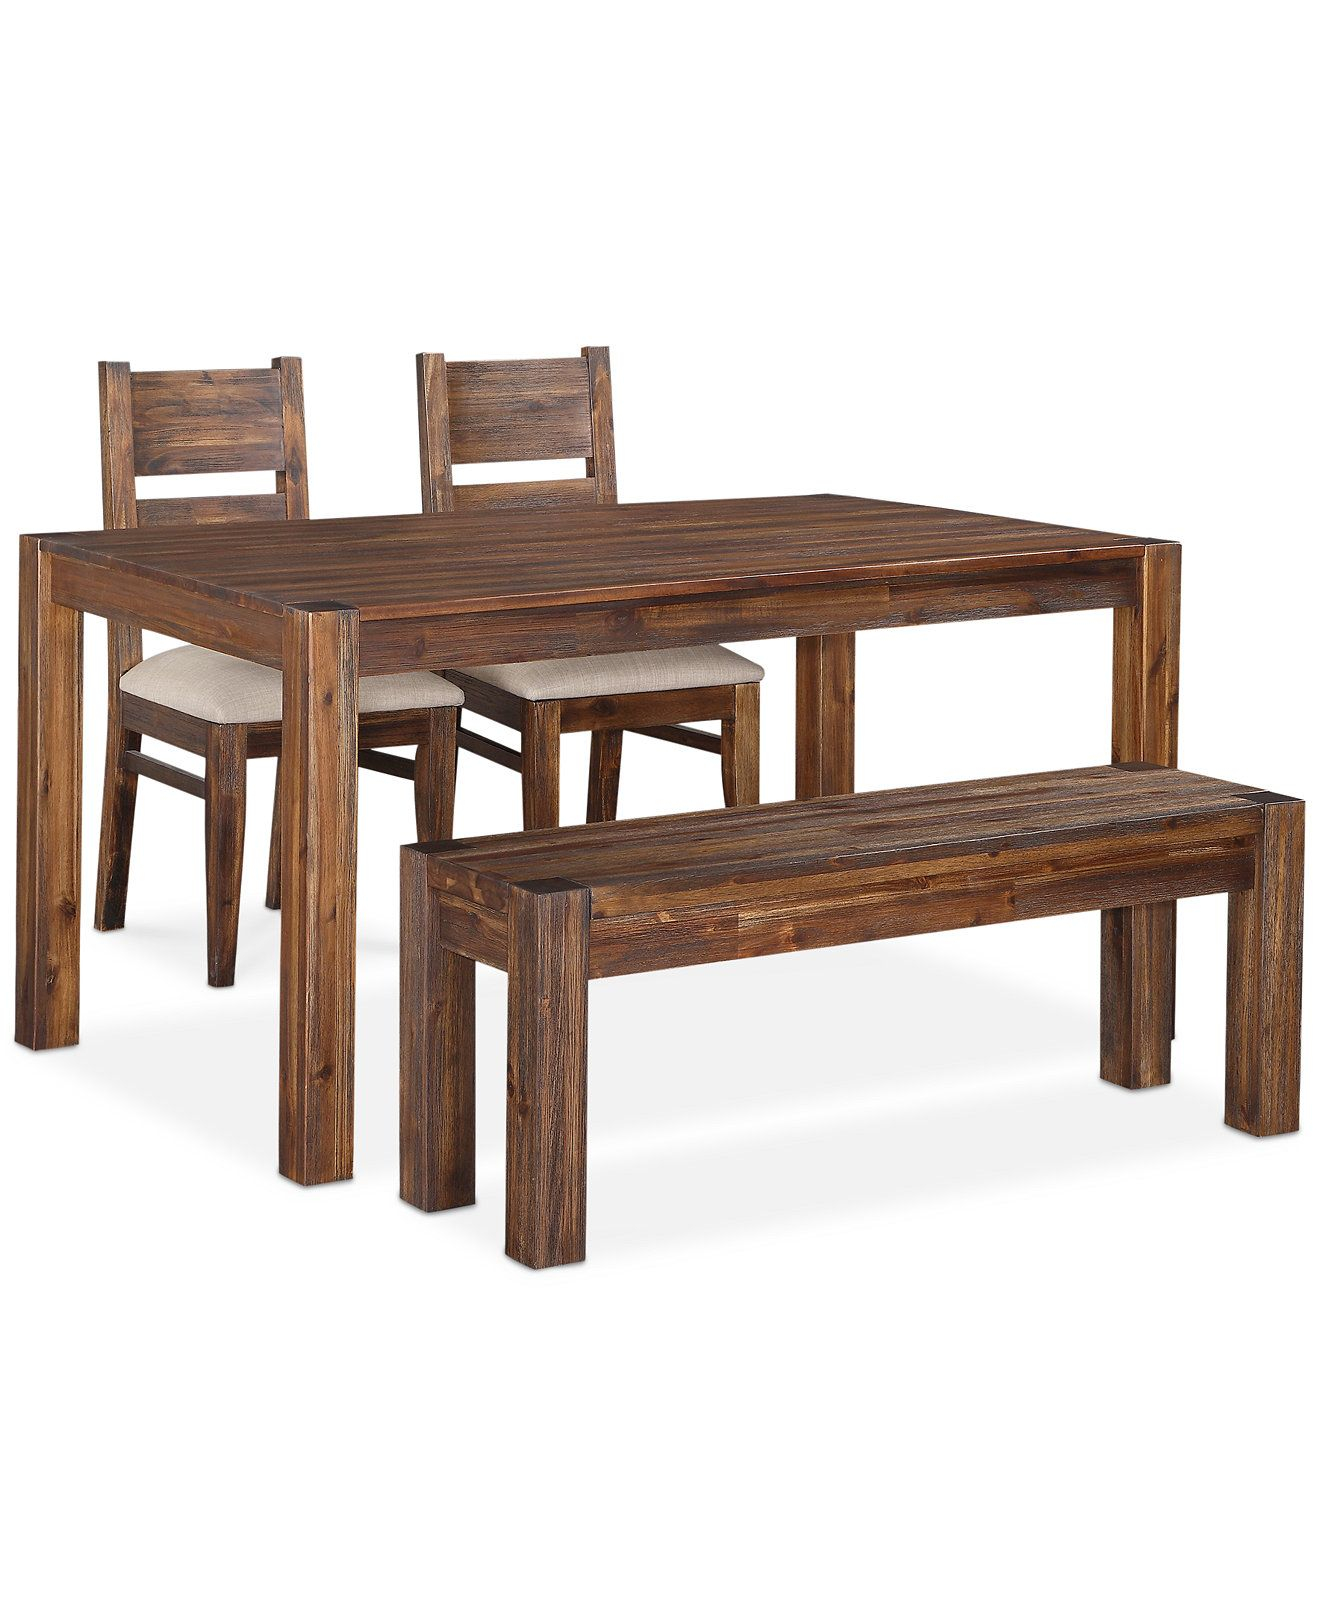 Avondale 4 Pc Dining Room Set Table Bench 2 Side Chairs with regard to measurements 1320 X 1616